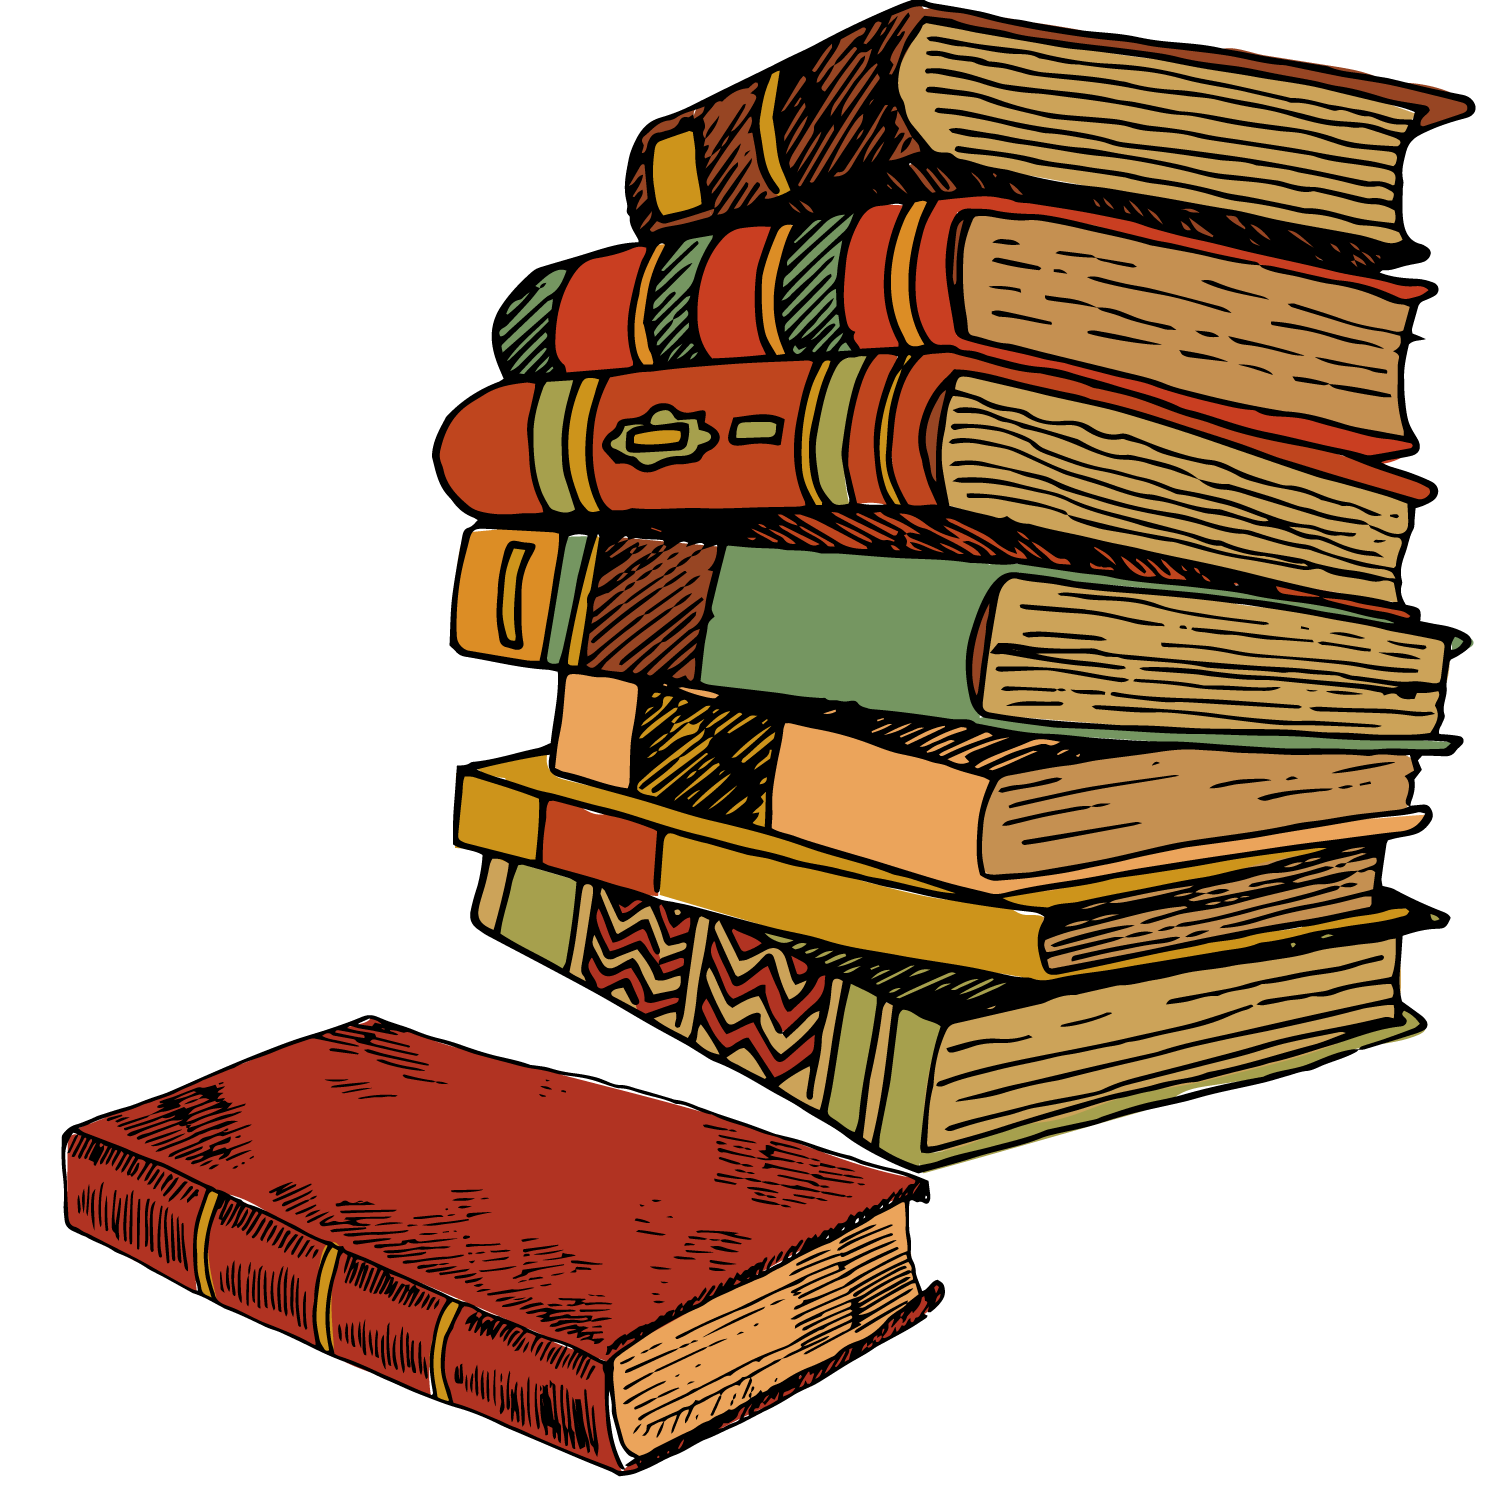 Paper Book Illustration - Ancient Books png download - 1500*1500 - Free